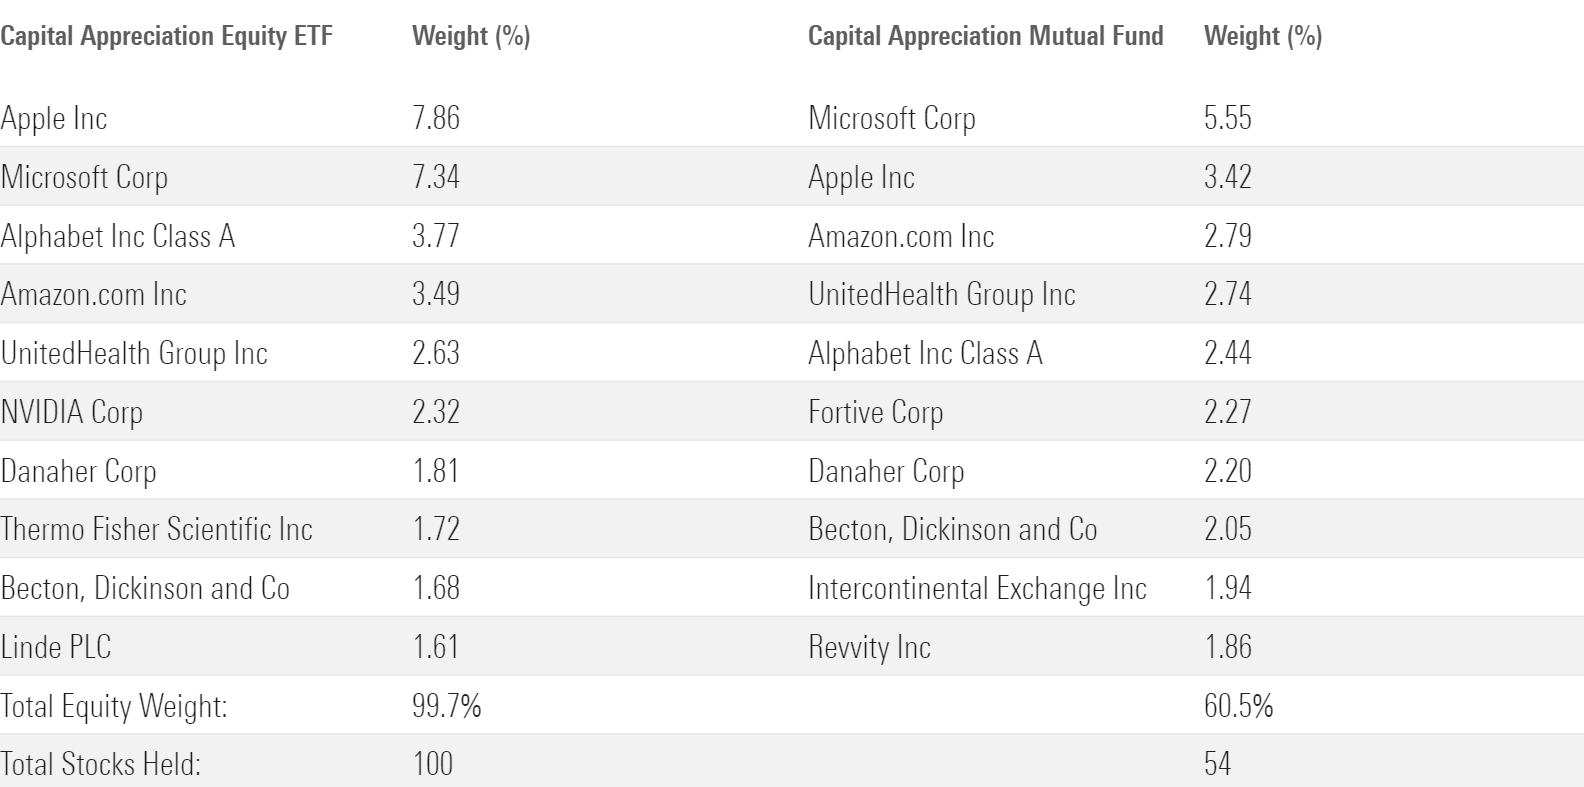 This table compares the top 10 stock holdings of T. Rowe Price Capital Appreciation Fund and T. Rowe Price Capital Appreciation Equity ETF.